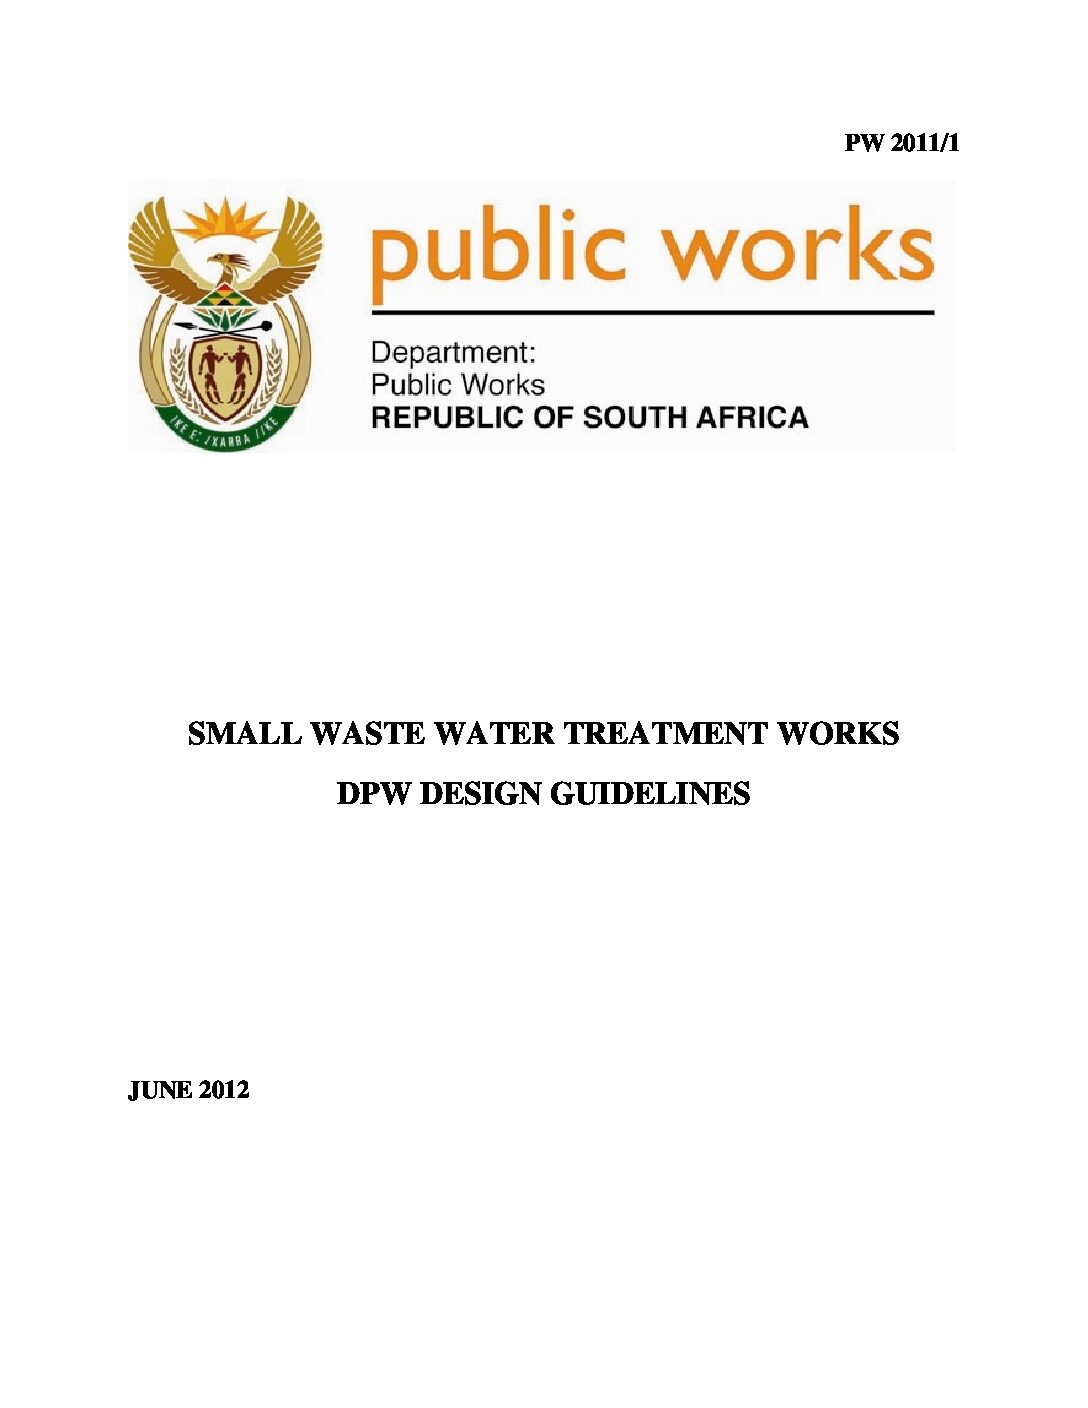 Small Wastewater Treatment Works DPW Design Guidelines